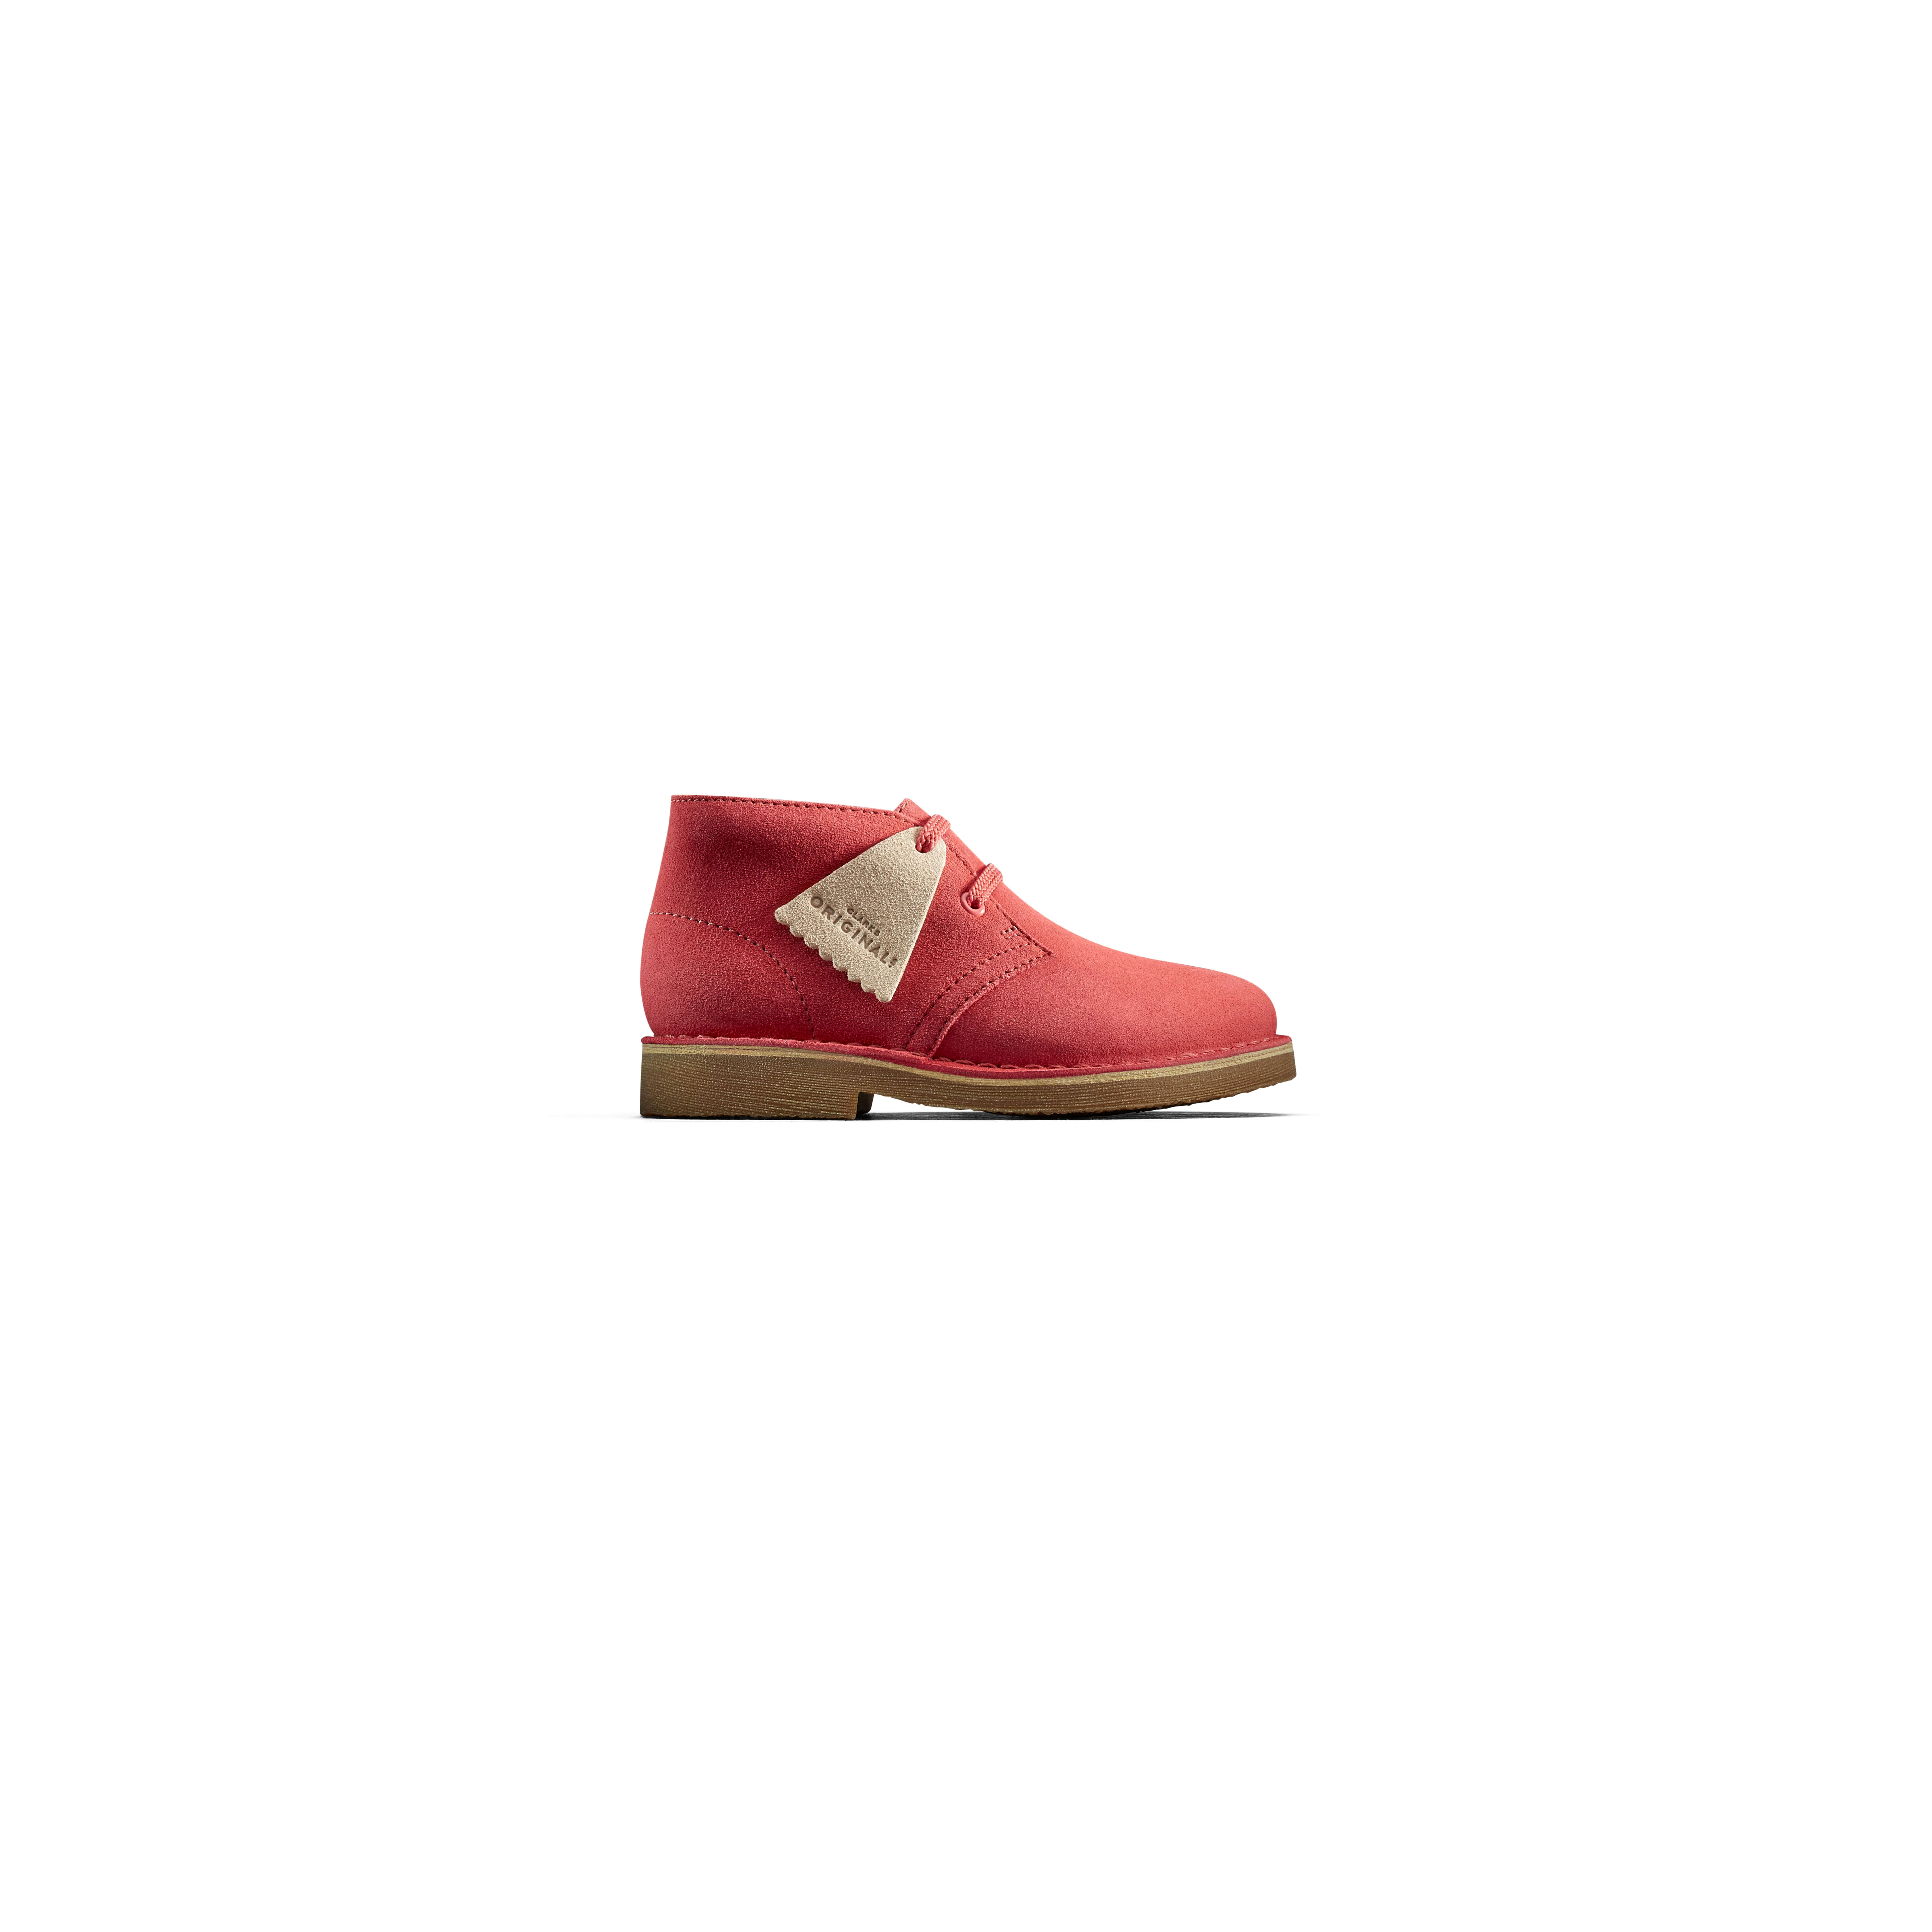 Kids_Desert_Boot_Coral_Side_1_WH_CONSR-copy